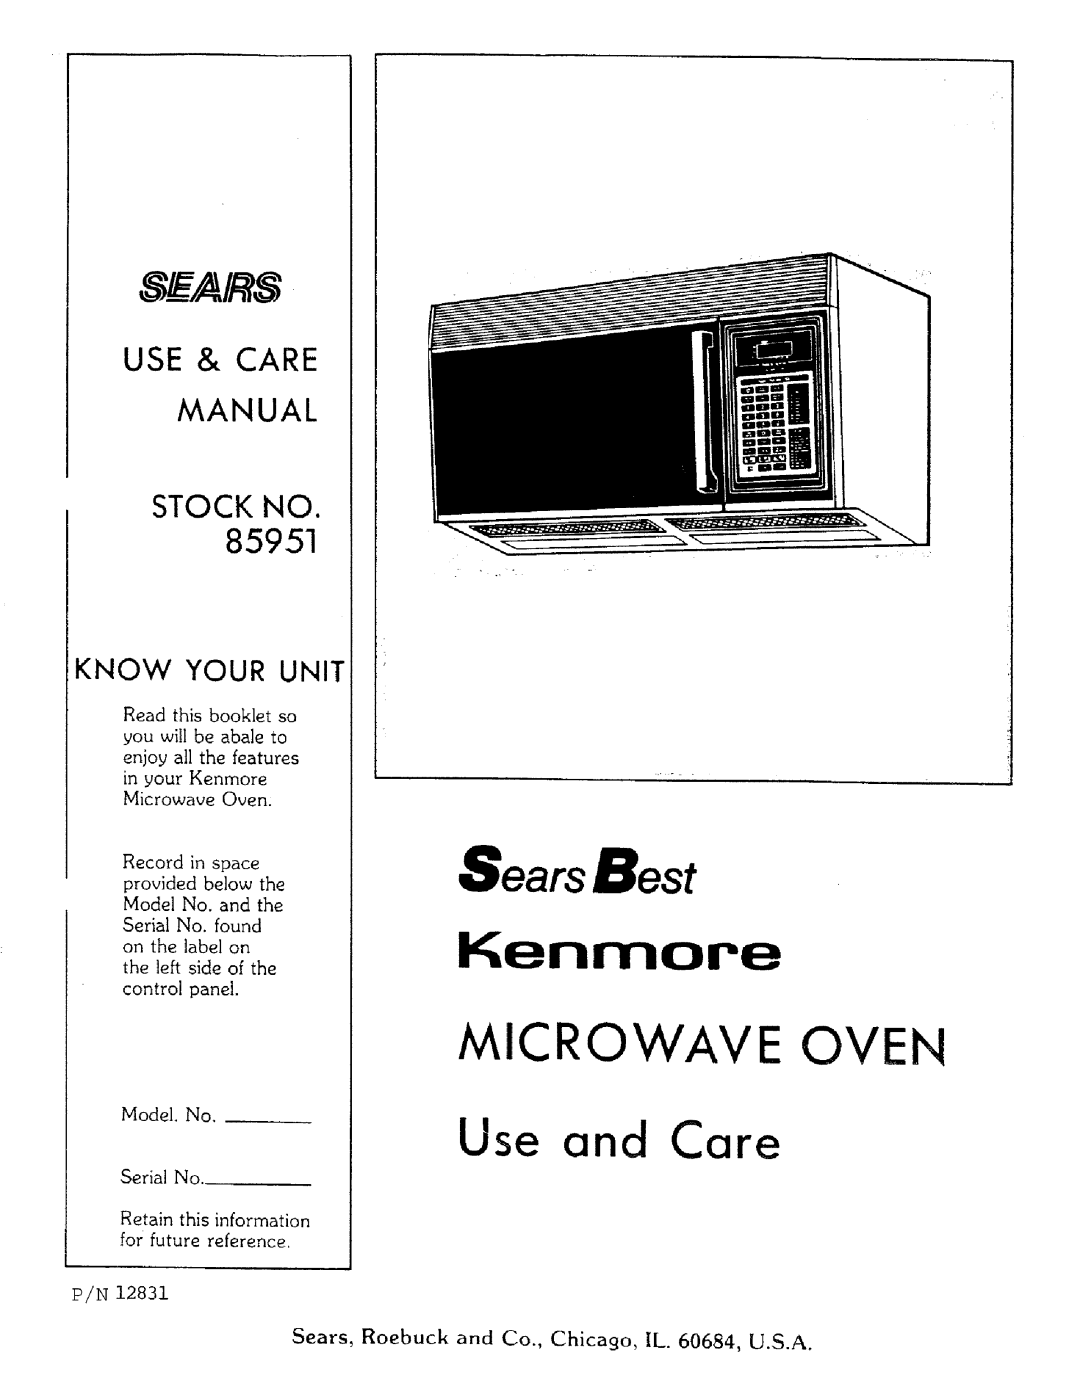 Sears 85951 manual MICROWAVE OVEN Use and Care, Use & Care Manual Stock No, Kenmore, Sears Best, KNOW YOUR UNI1 